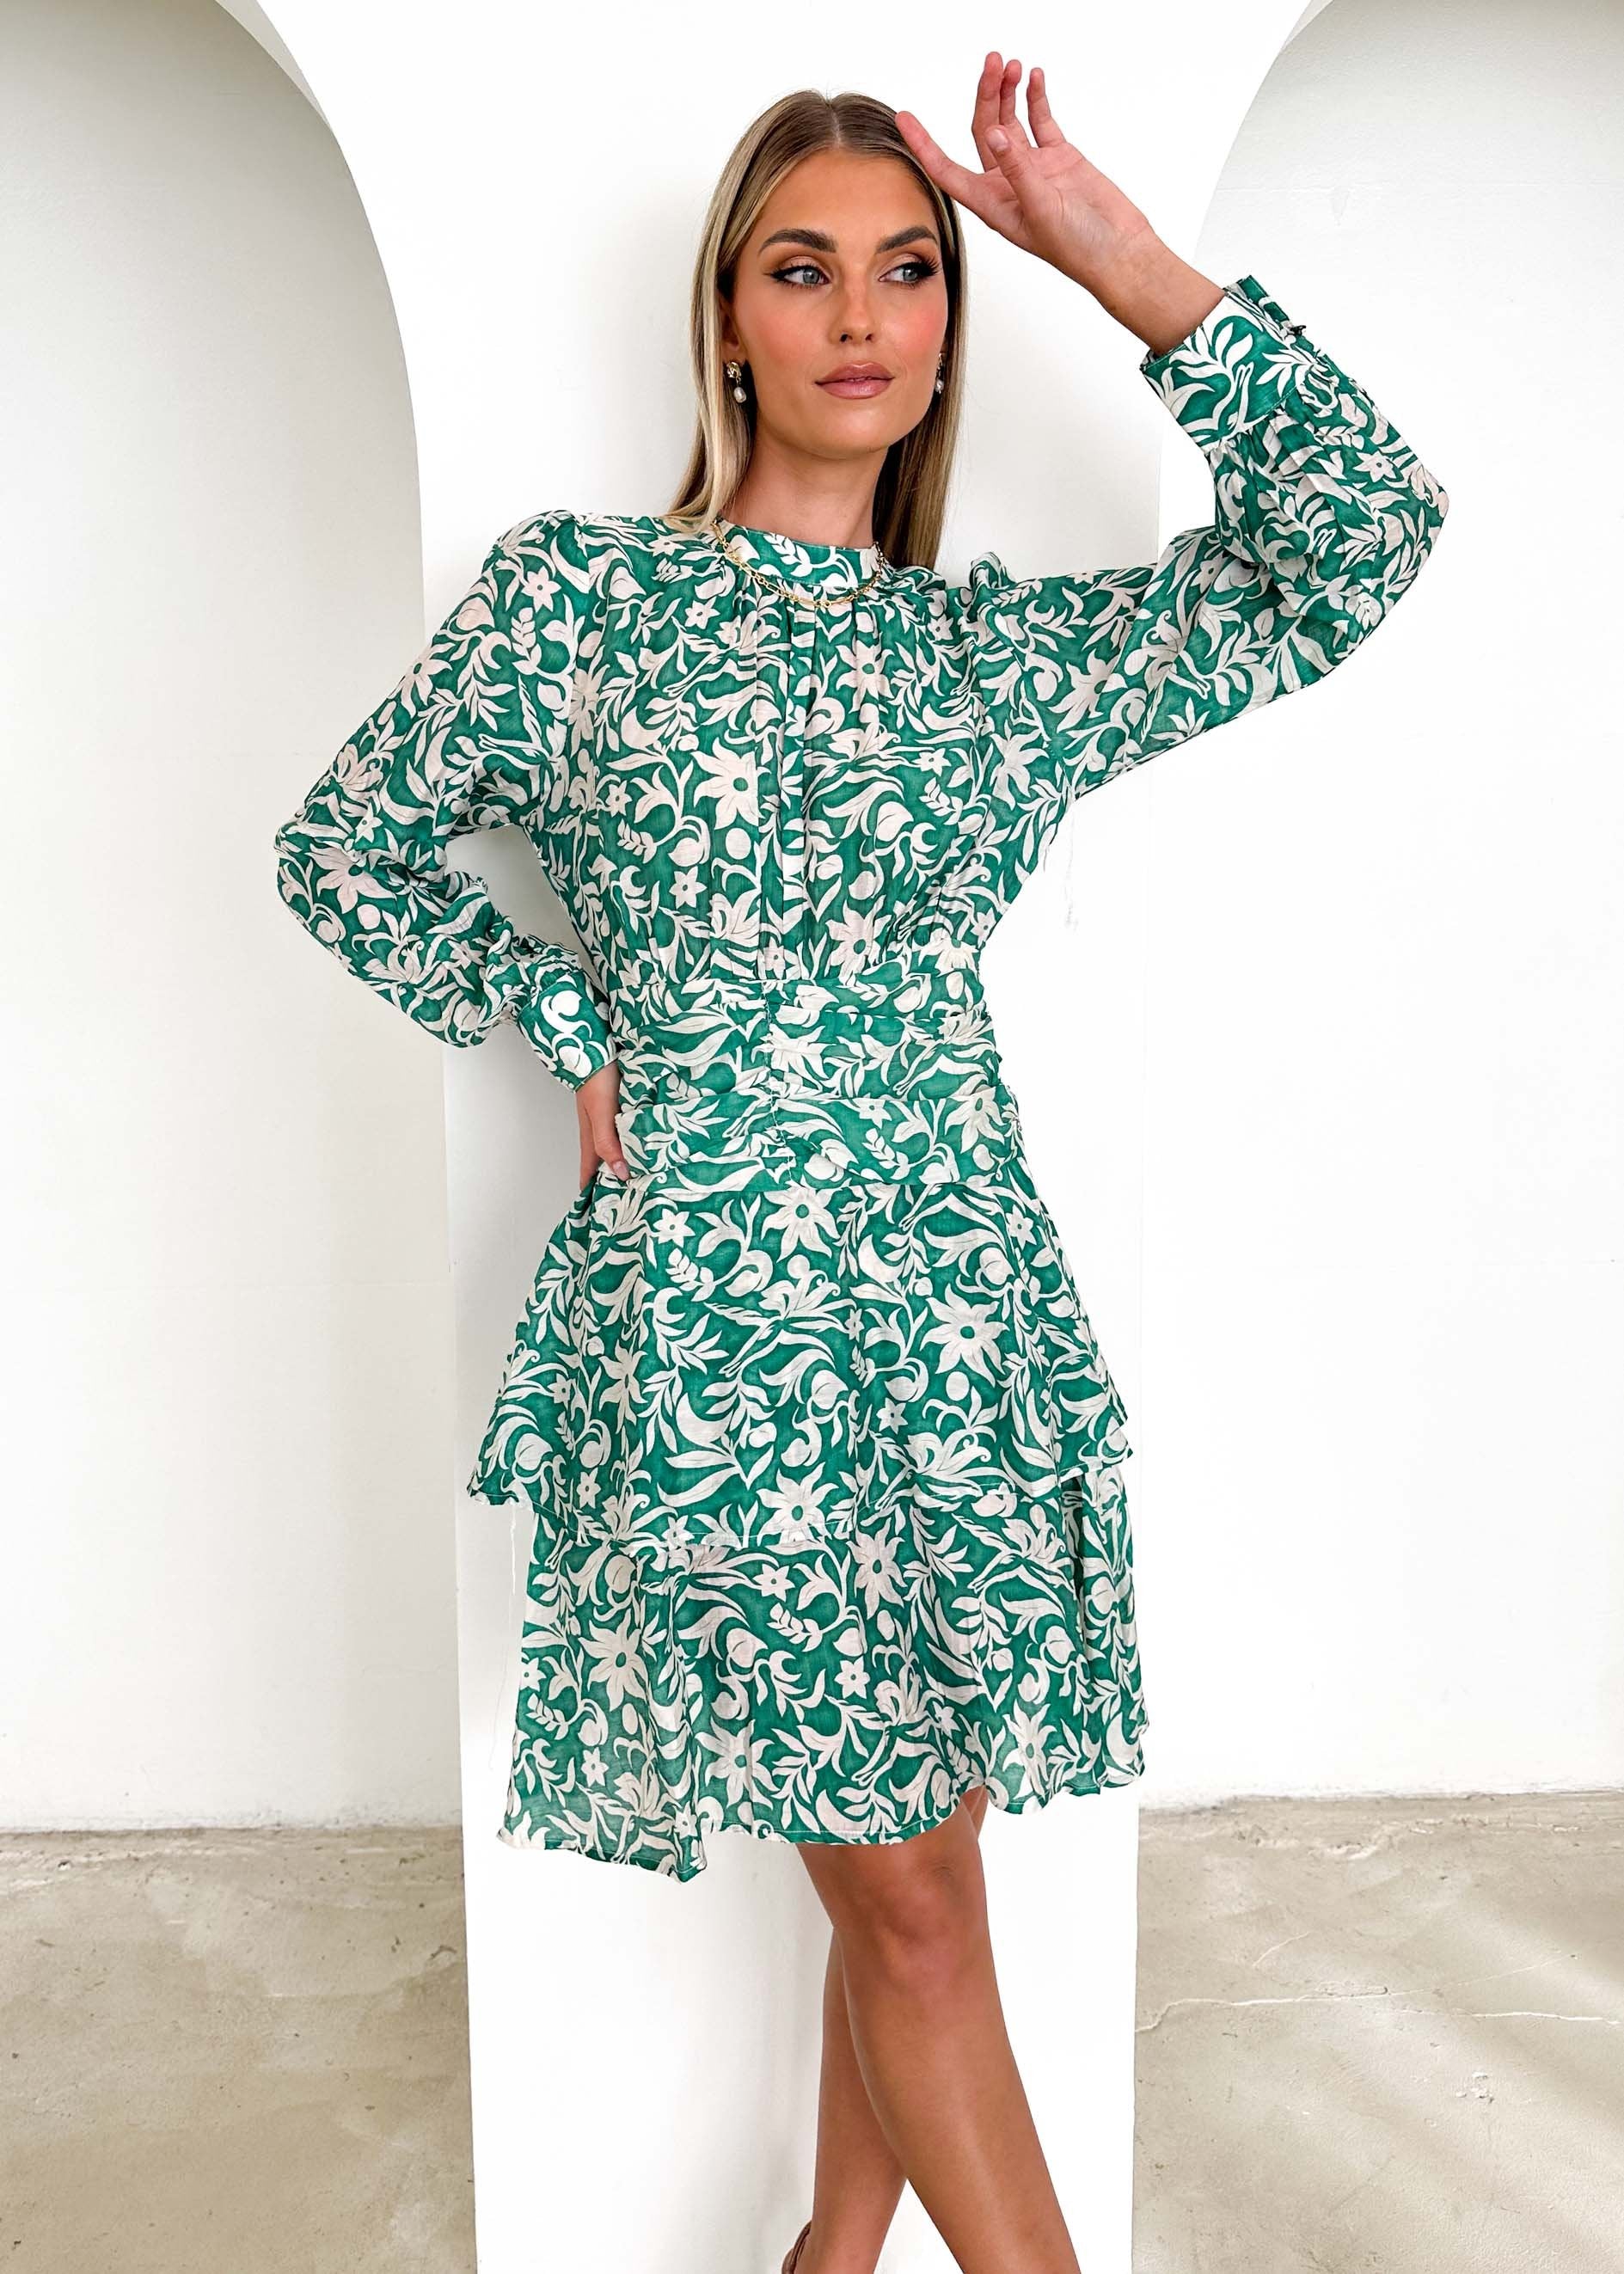 Chickro Dress - Green Floral